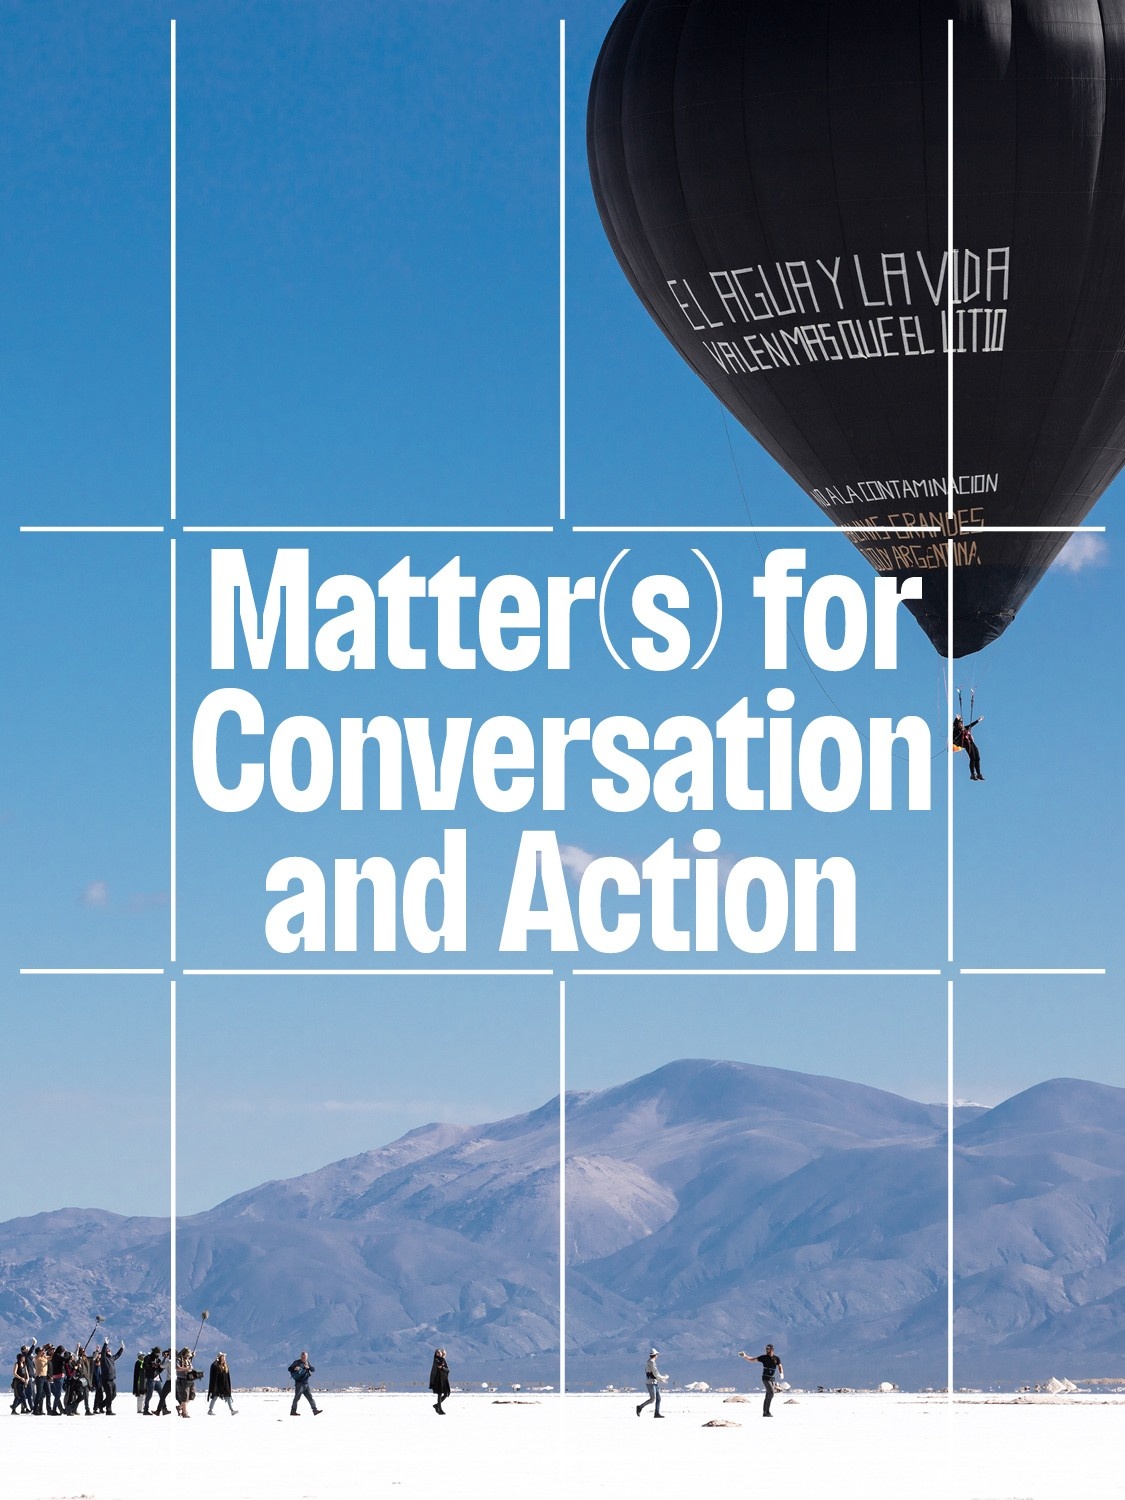 The event title "Matters for Conversation and Action" overlaid on a photo of a black hot air balloon rising above a white salt flat in Argentina. A group of people trail the balloon on the ground.